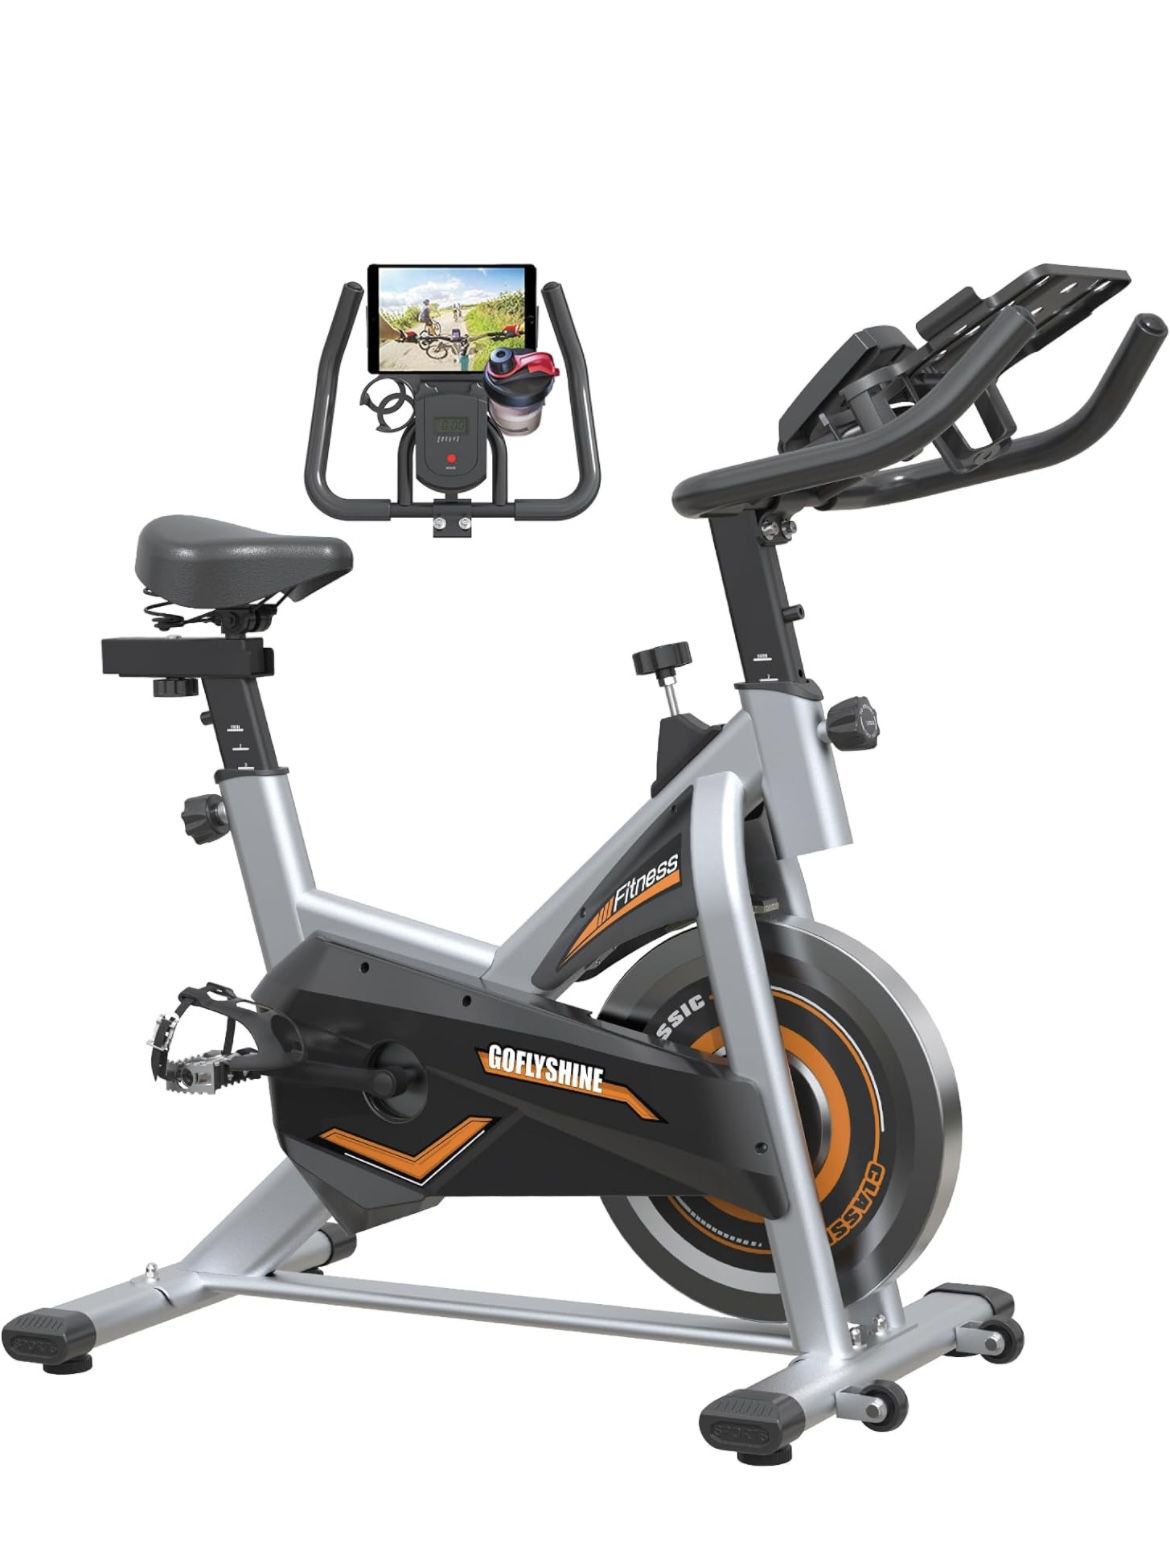 New Exercise Bike for Home Indoor Cycling